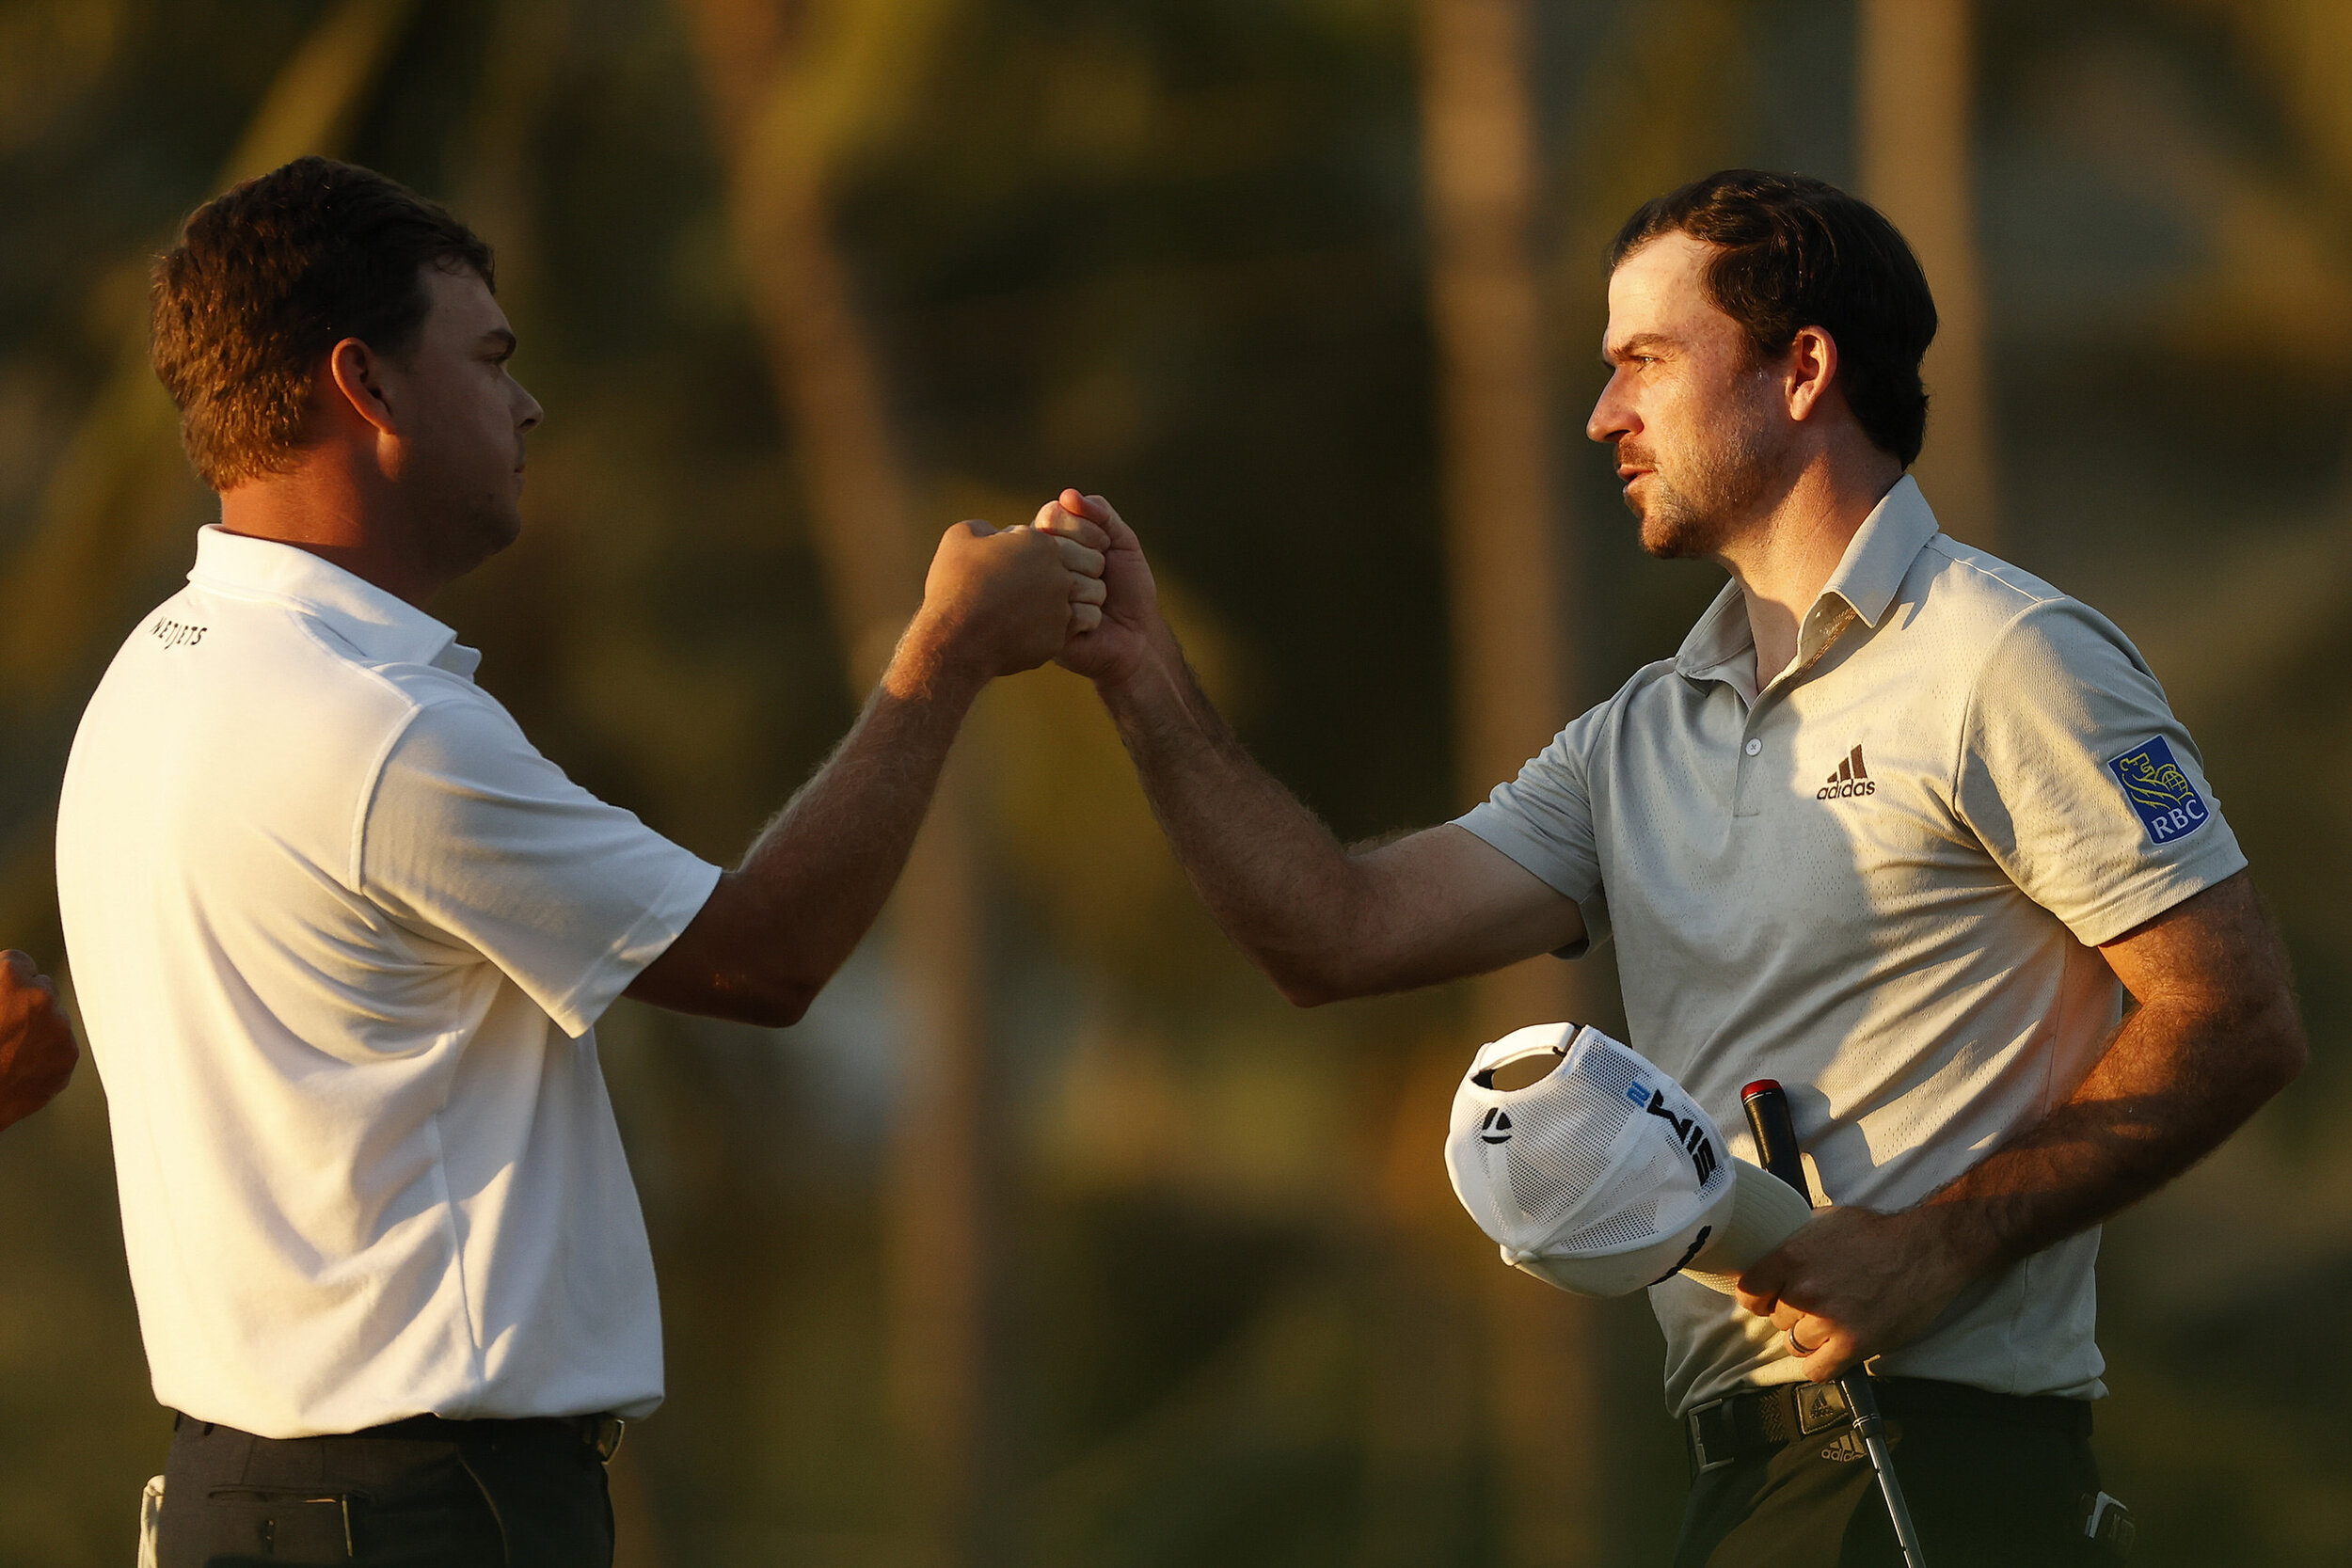  HONOLULU, HAWAII - JANUARY 15: (L-R) Keith Mitchell of the United States and Nick Taylor of Canada fist bump after finishing on the ninth hole during the second round of the Sony Open in Hawaii at the Waialae Country Club on January 15, 2021 in Hono